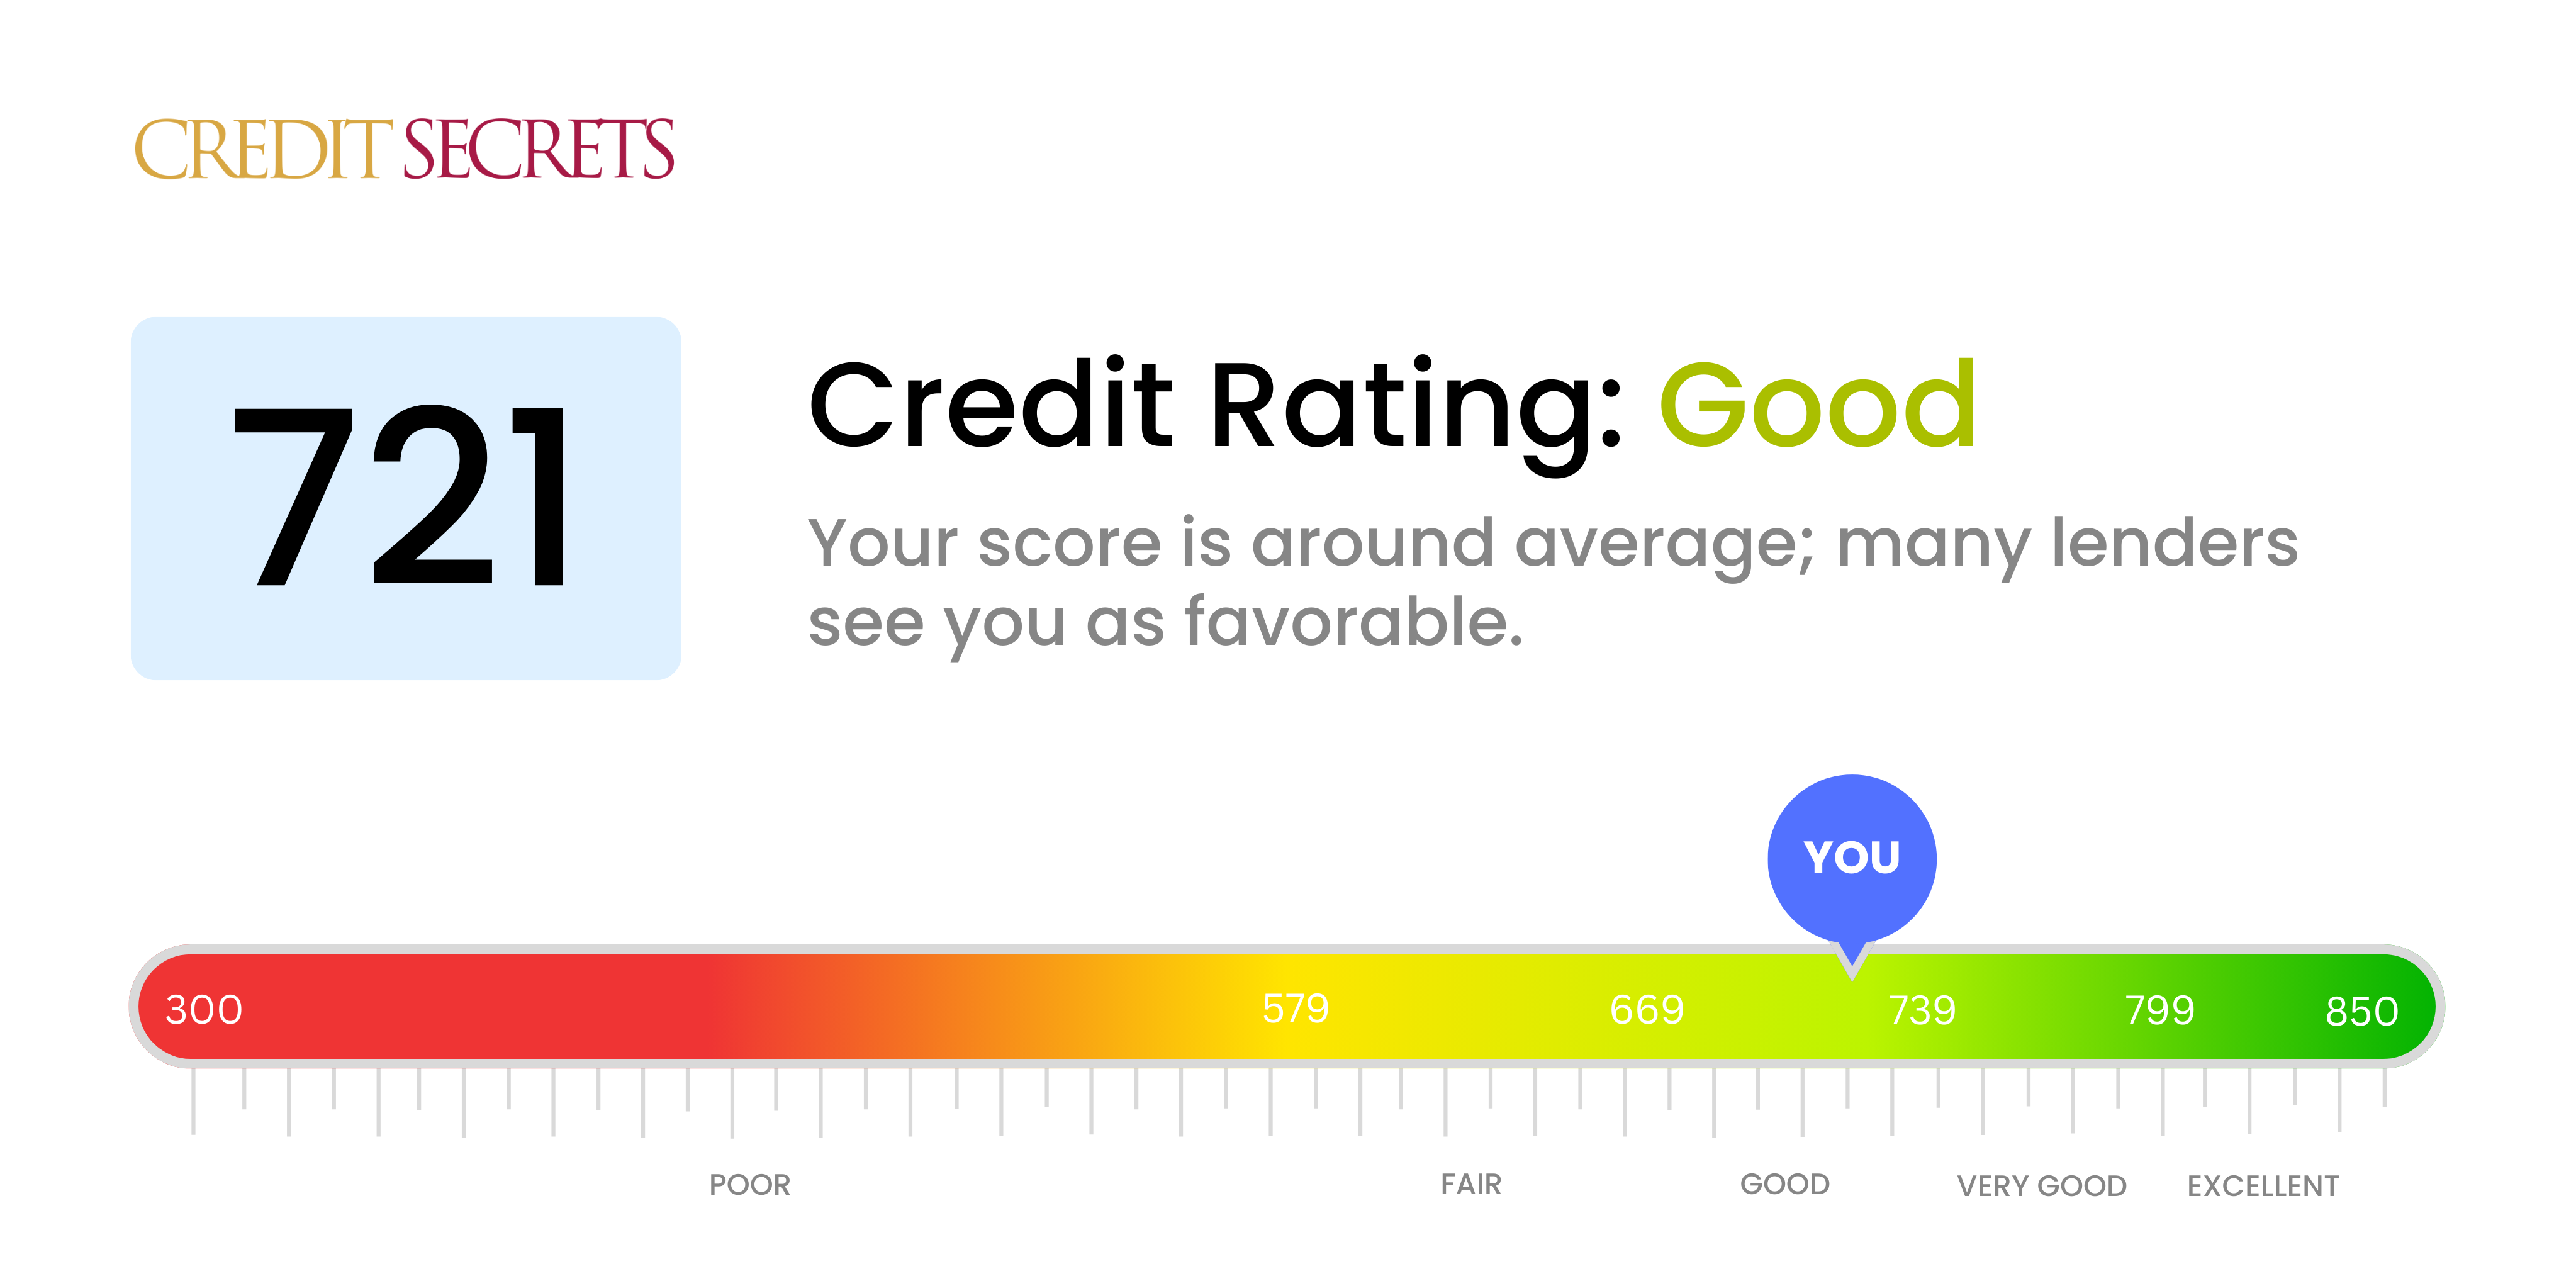 Is 721 a good credit score?